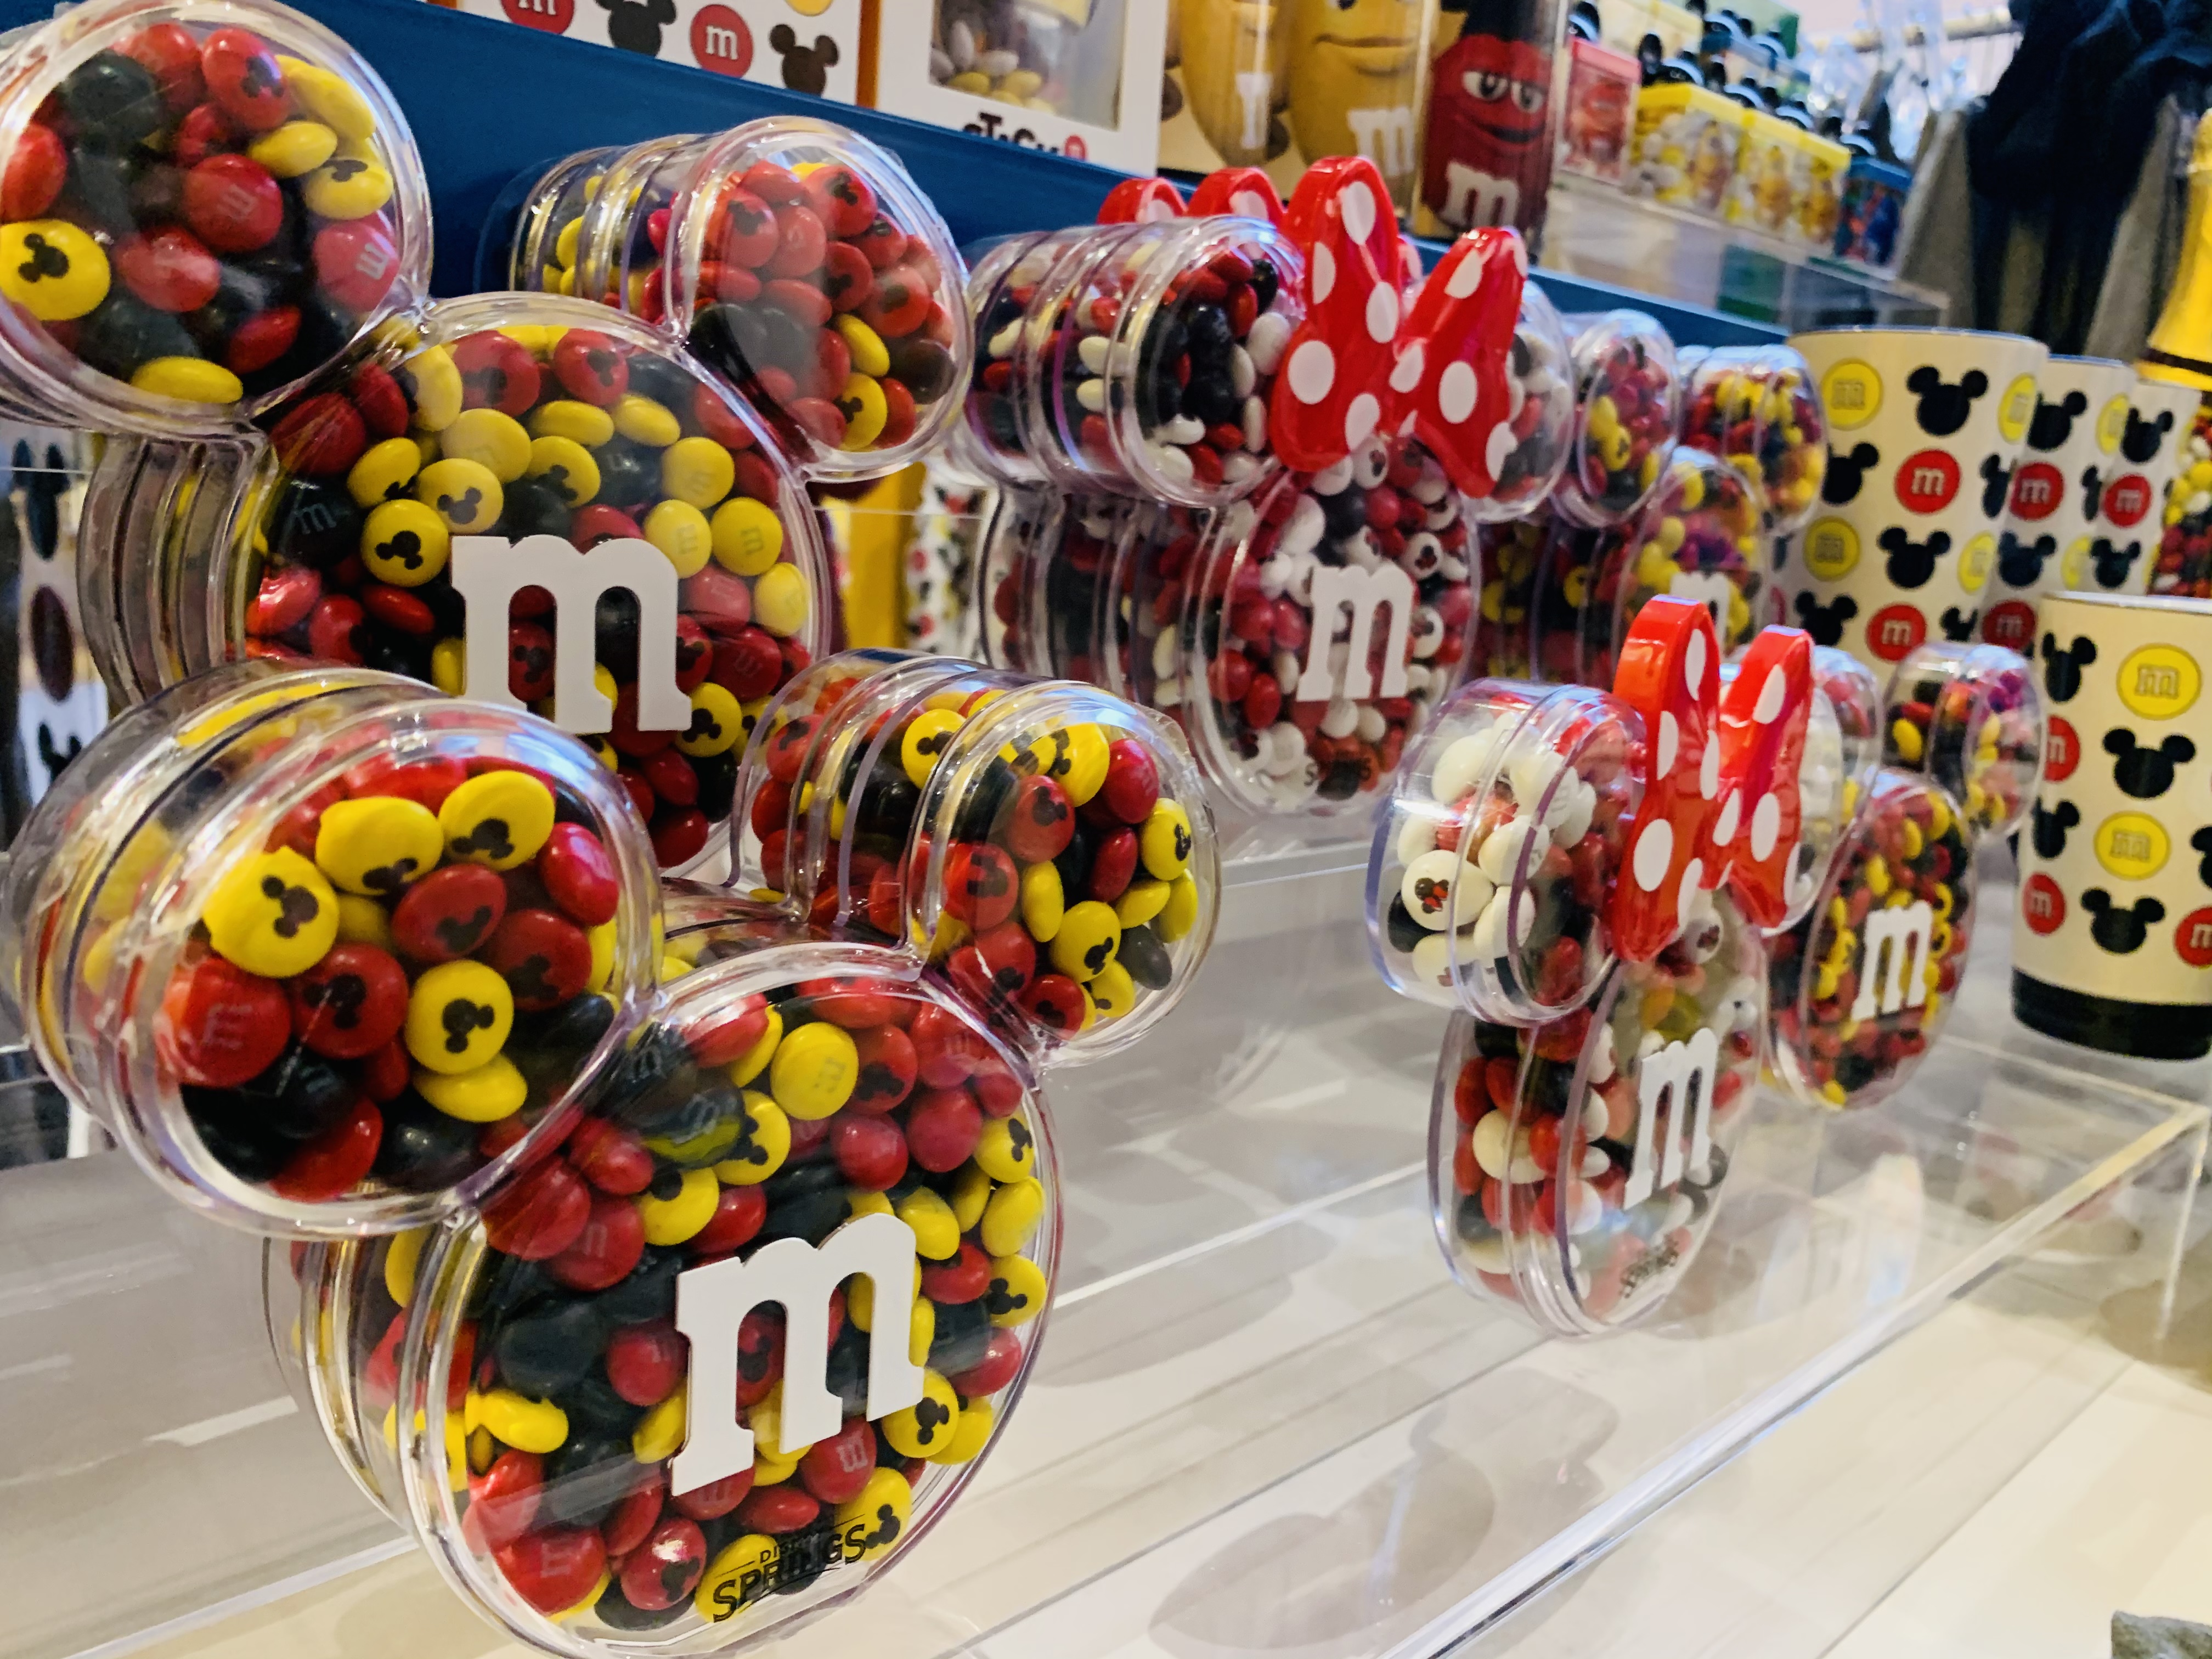 The Disney Springs M&Ms Store Joins in Flavors of Florida with New